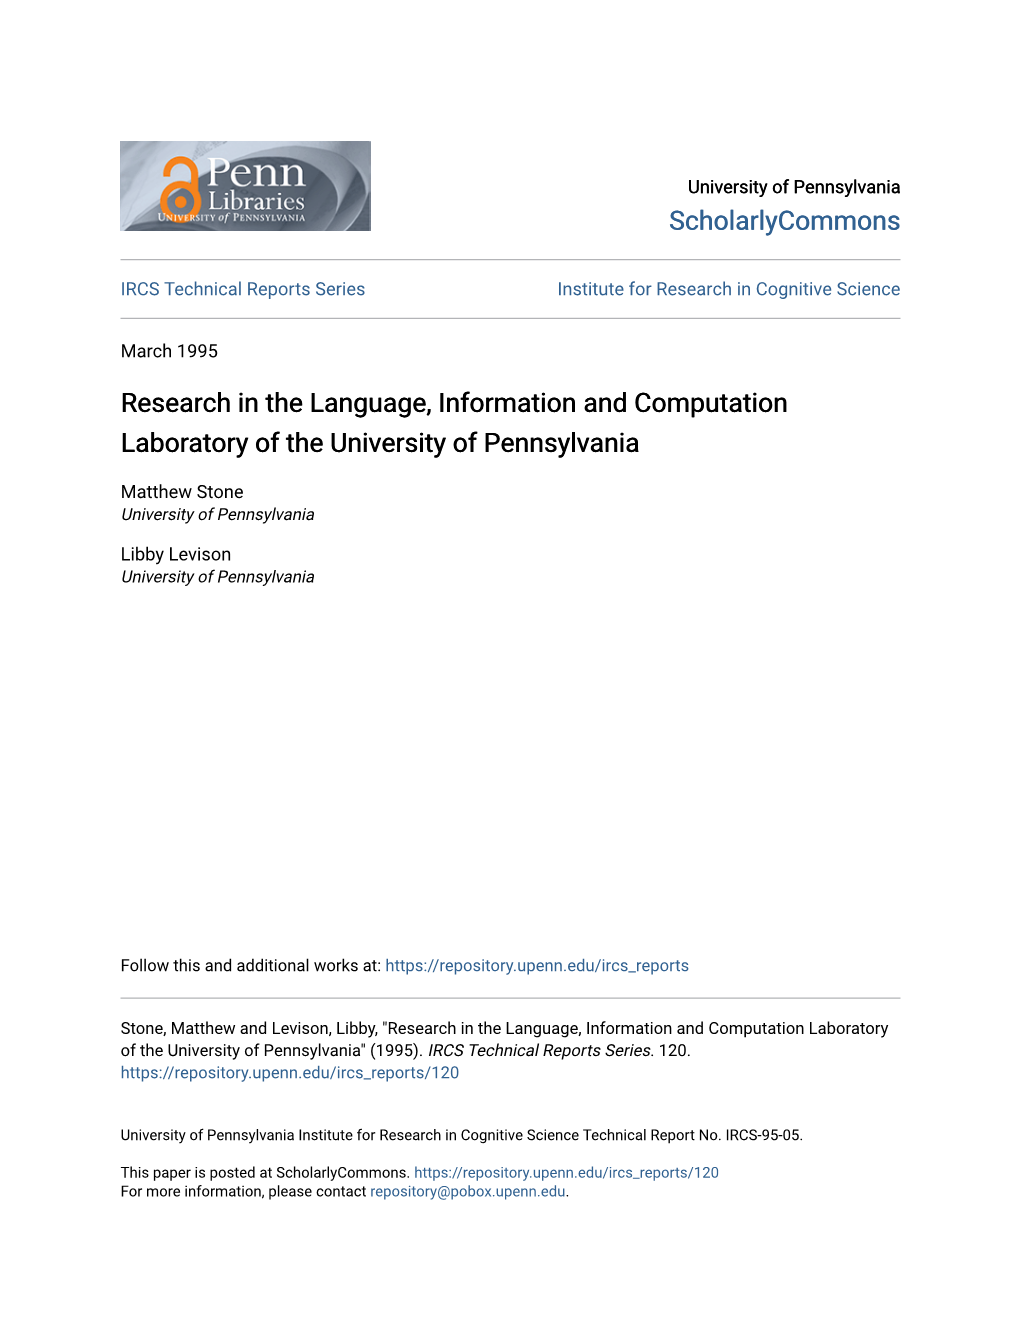 Research in the Language, Information and Computation Laboratory of the University of Pennsylvania